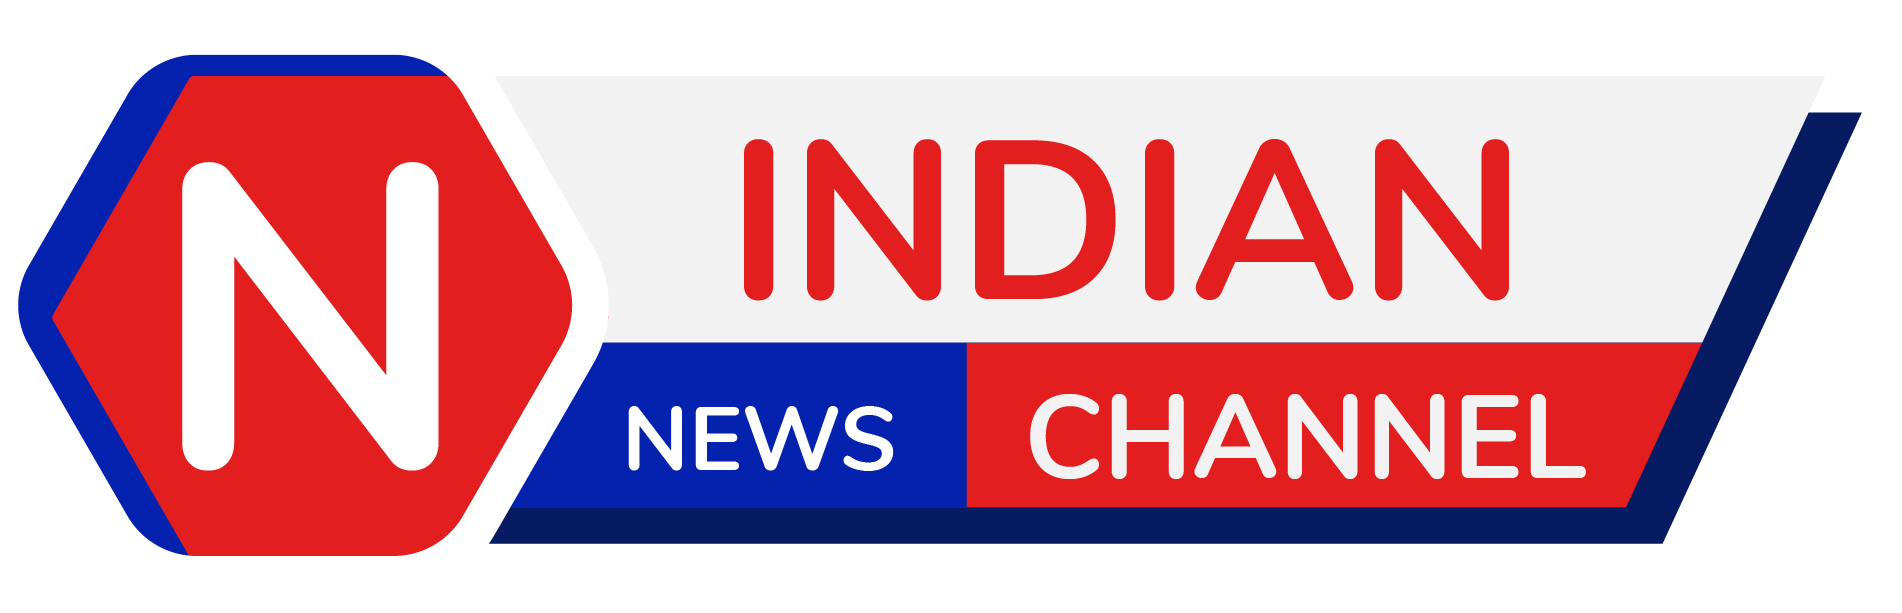 Indian News Channel